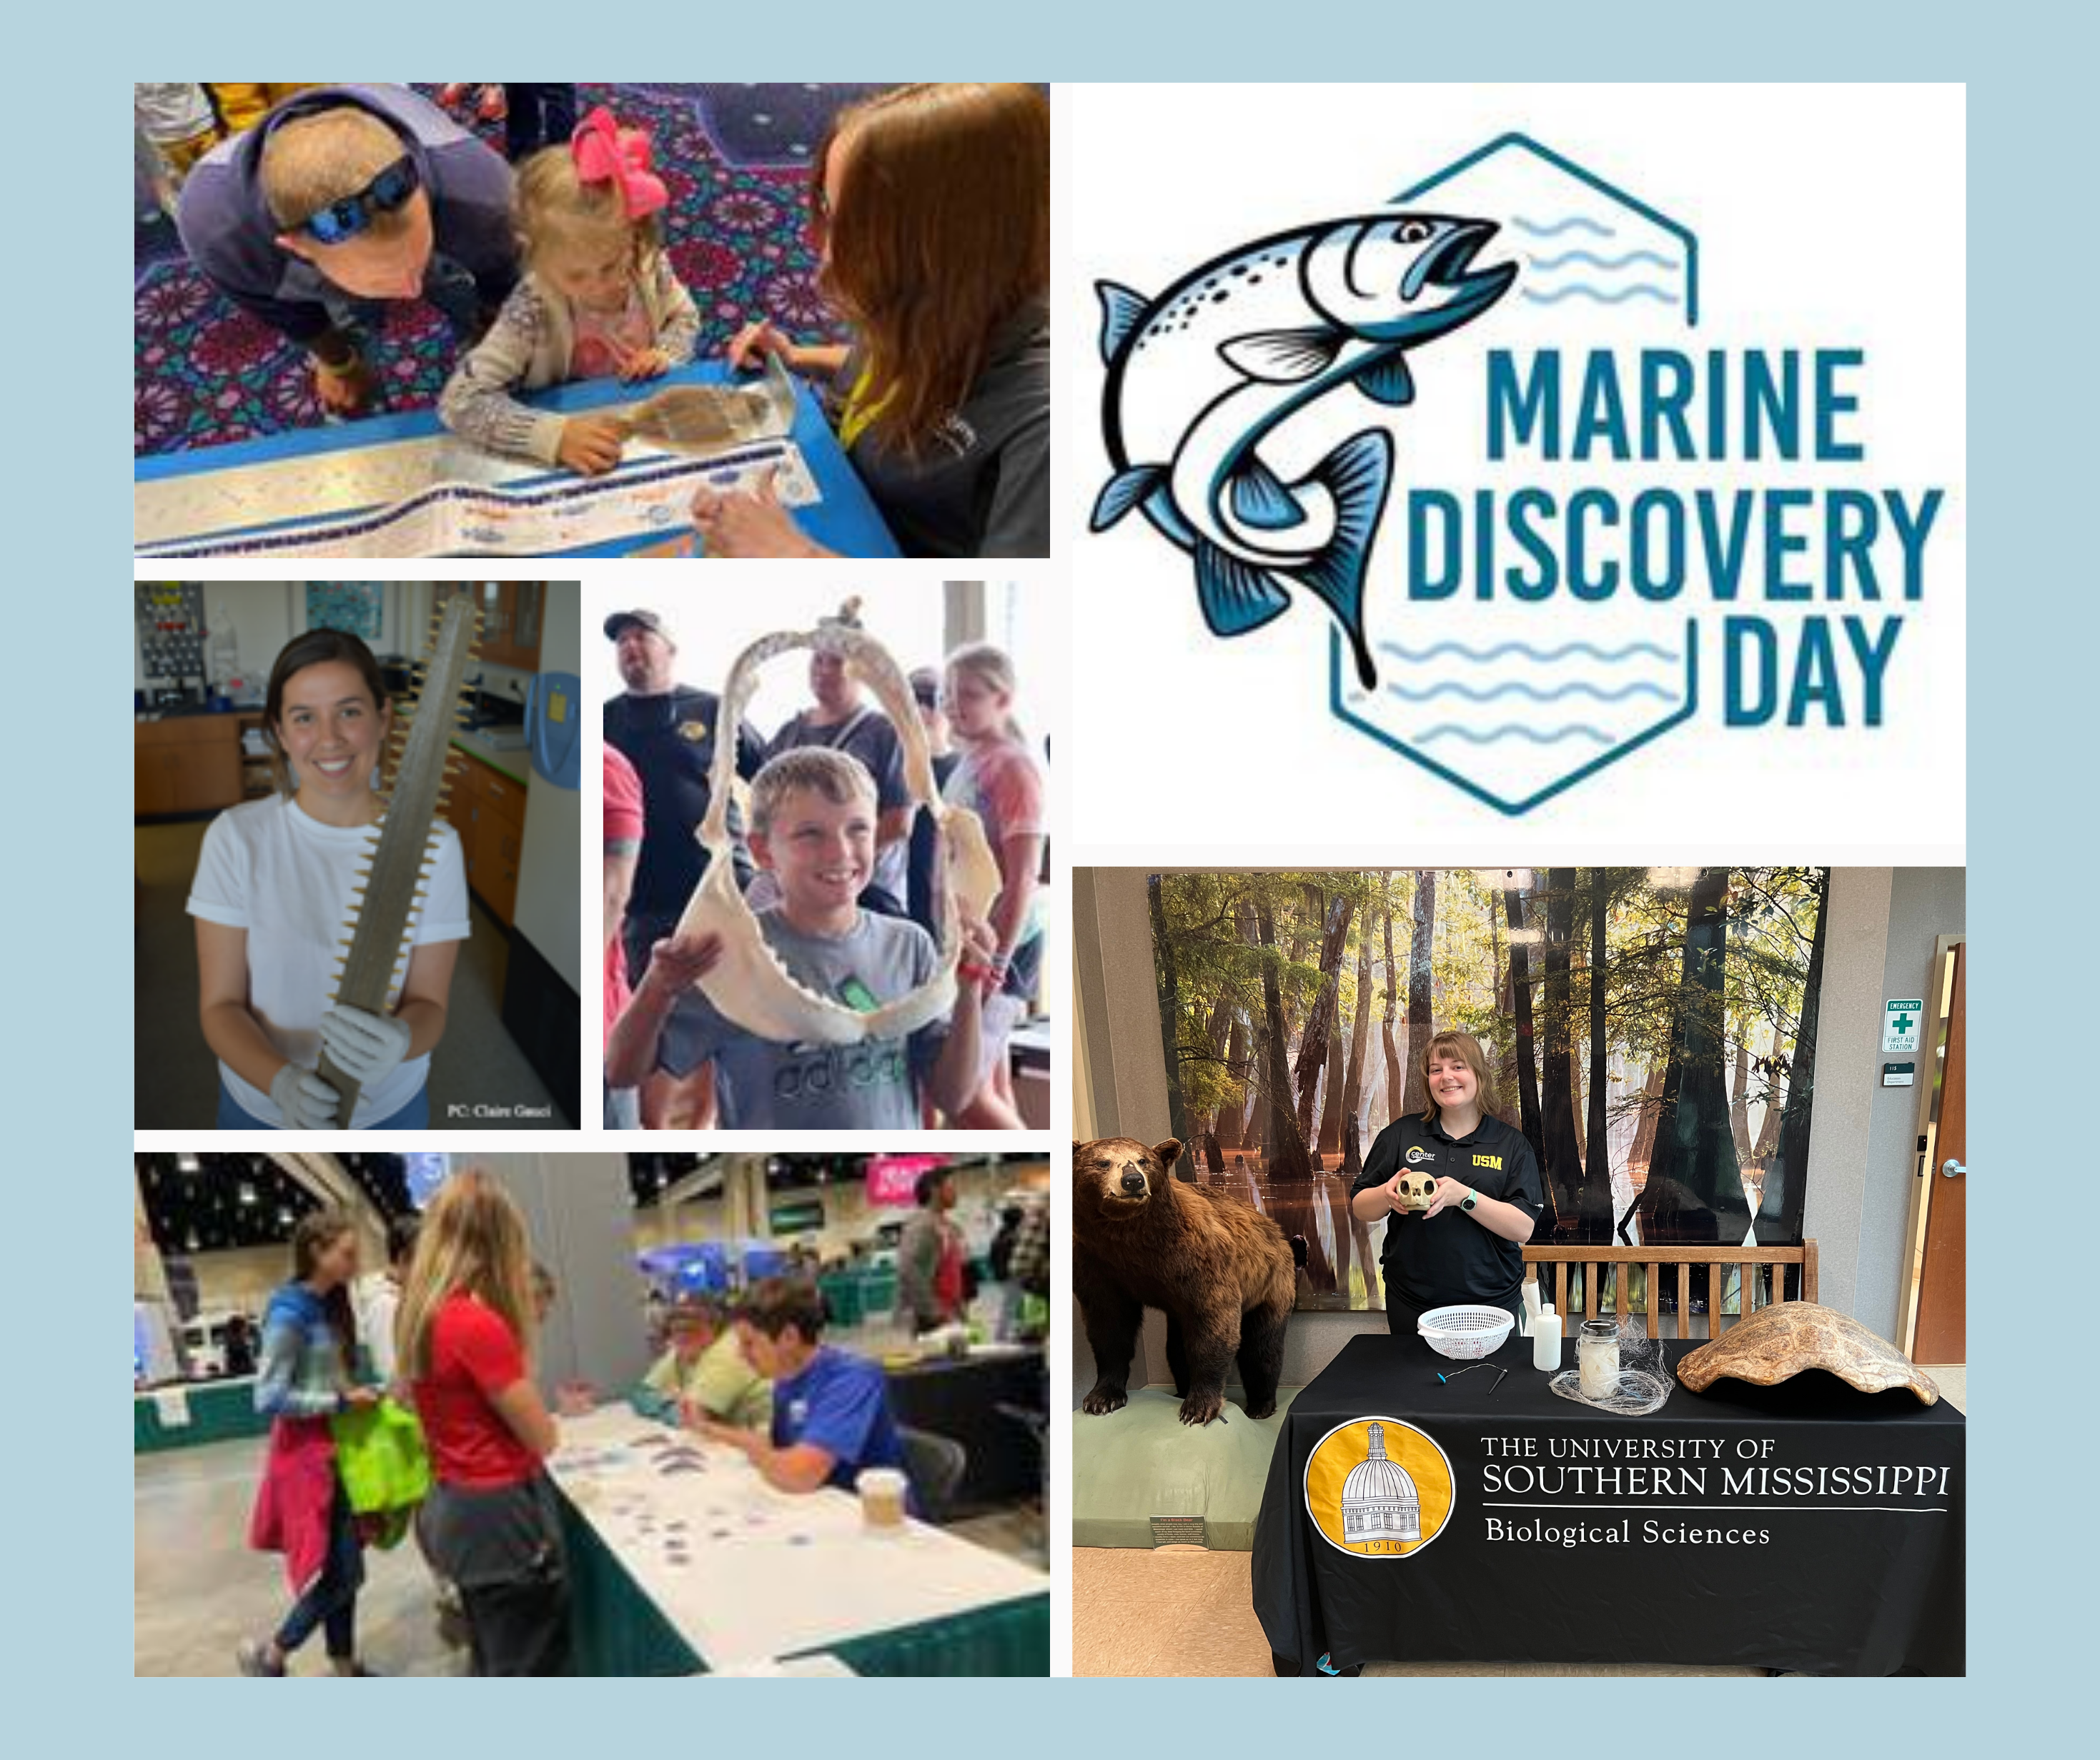 marine discovery day at mississippi museum of natural science